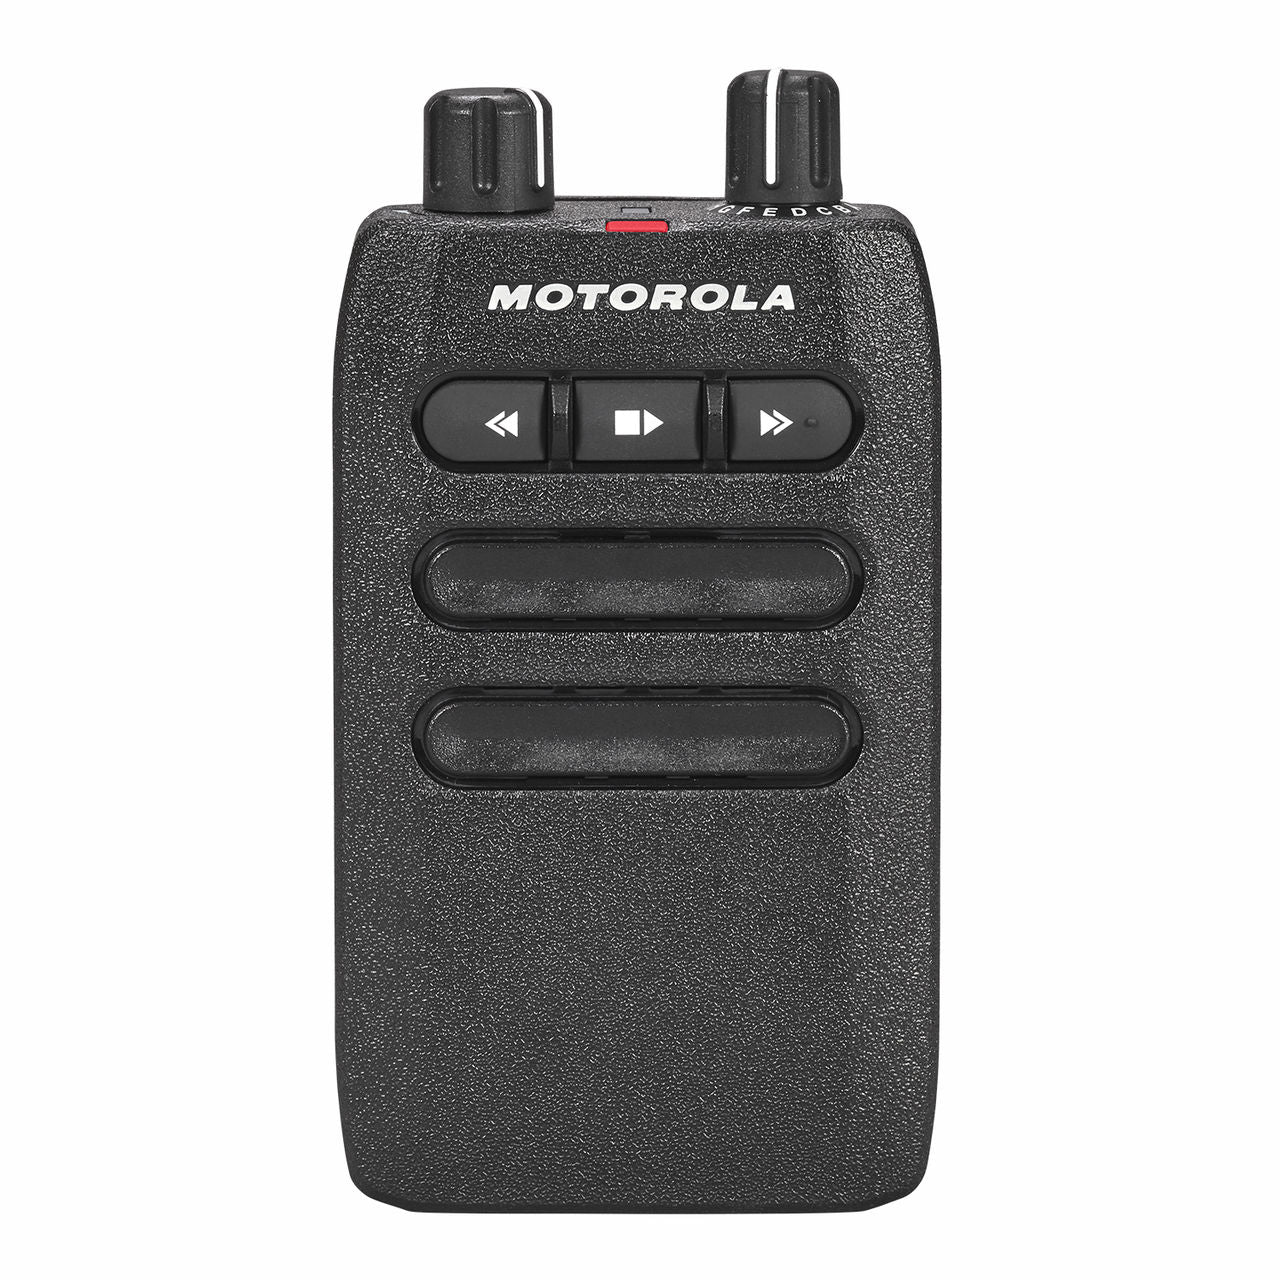 Motorola MINITOR 7 Voice Pager, 5 Channel IS - VHF 143-174 Mhz